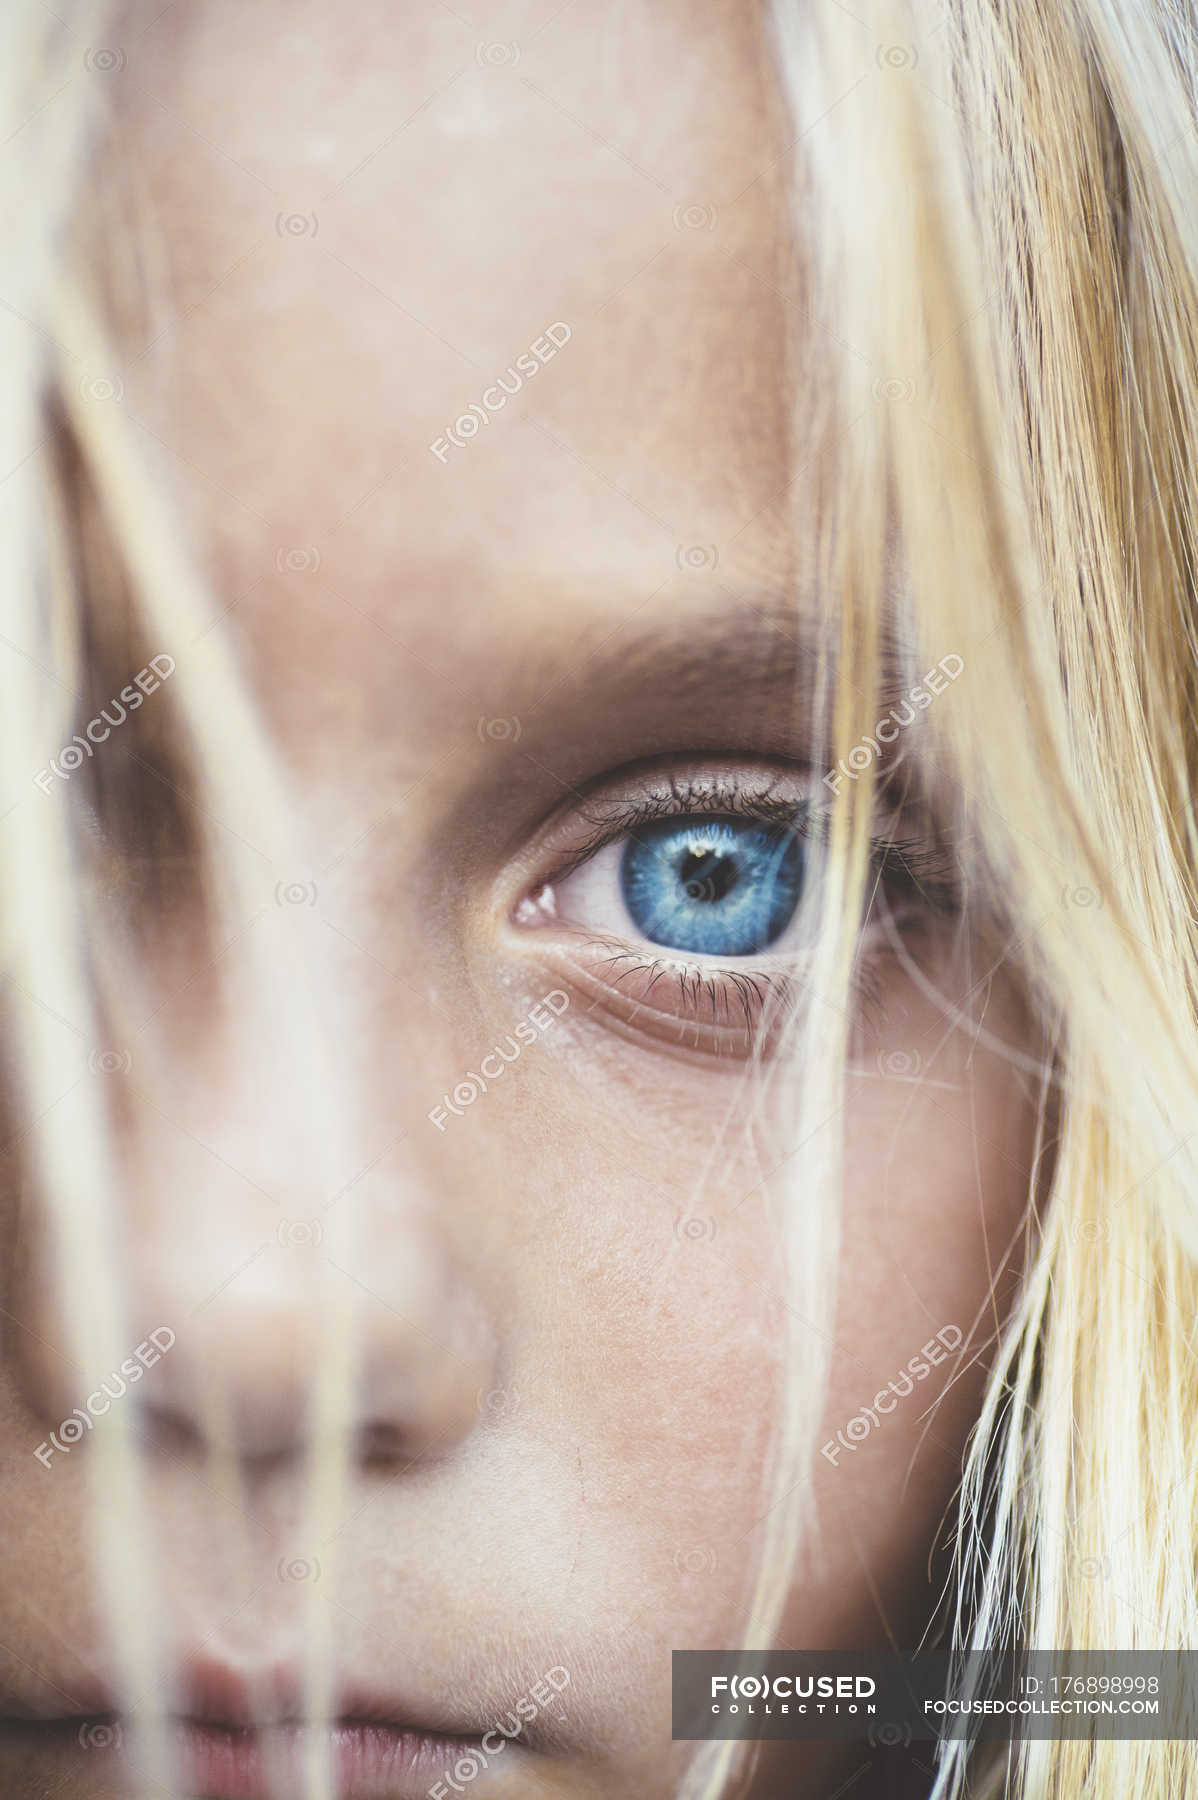 Blonde close up Close Up Shot Of Beautiful Blonde Preteen Girl Partial View Of Blue Eye Female Candid Stock Photo 176898998